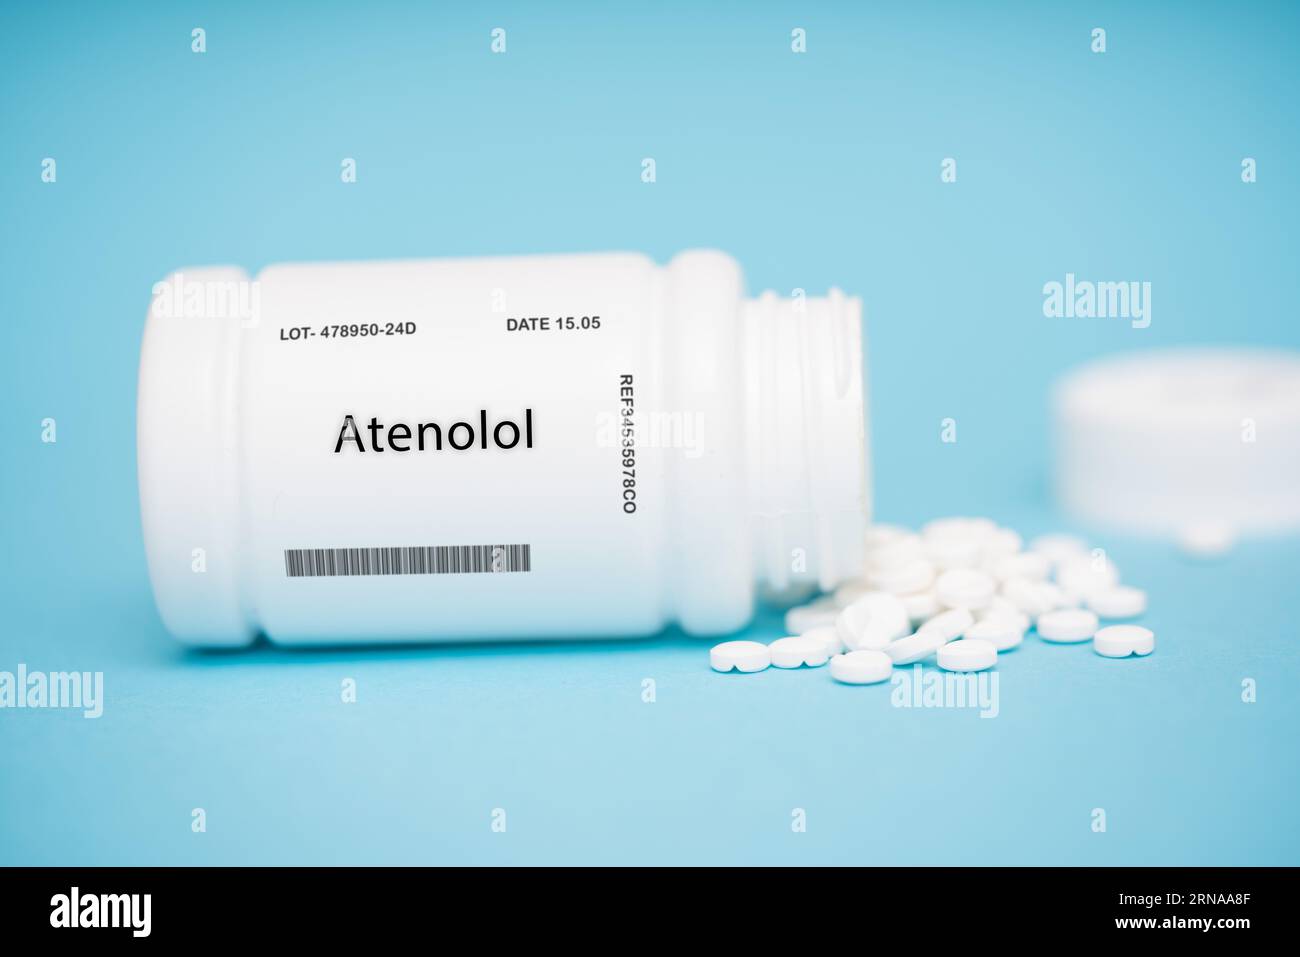 Atenolol, A medication used to treat high blood pressure and prevent angina, High blood pressure, angina, Tablet Stock Photo